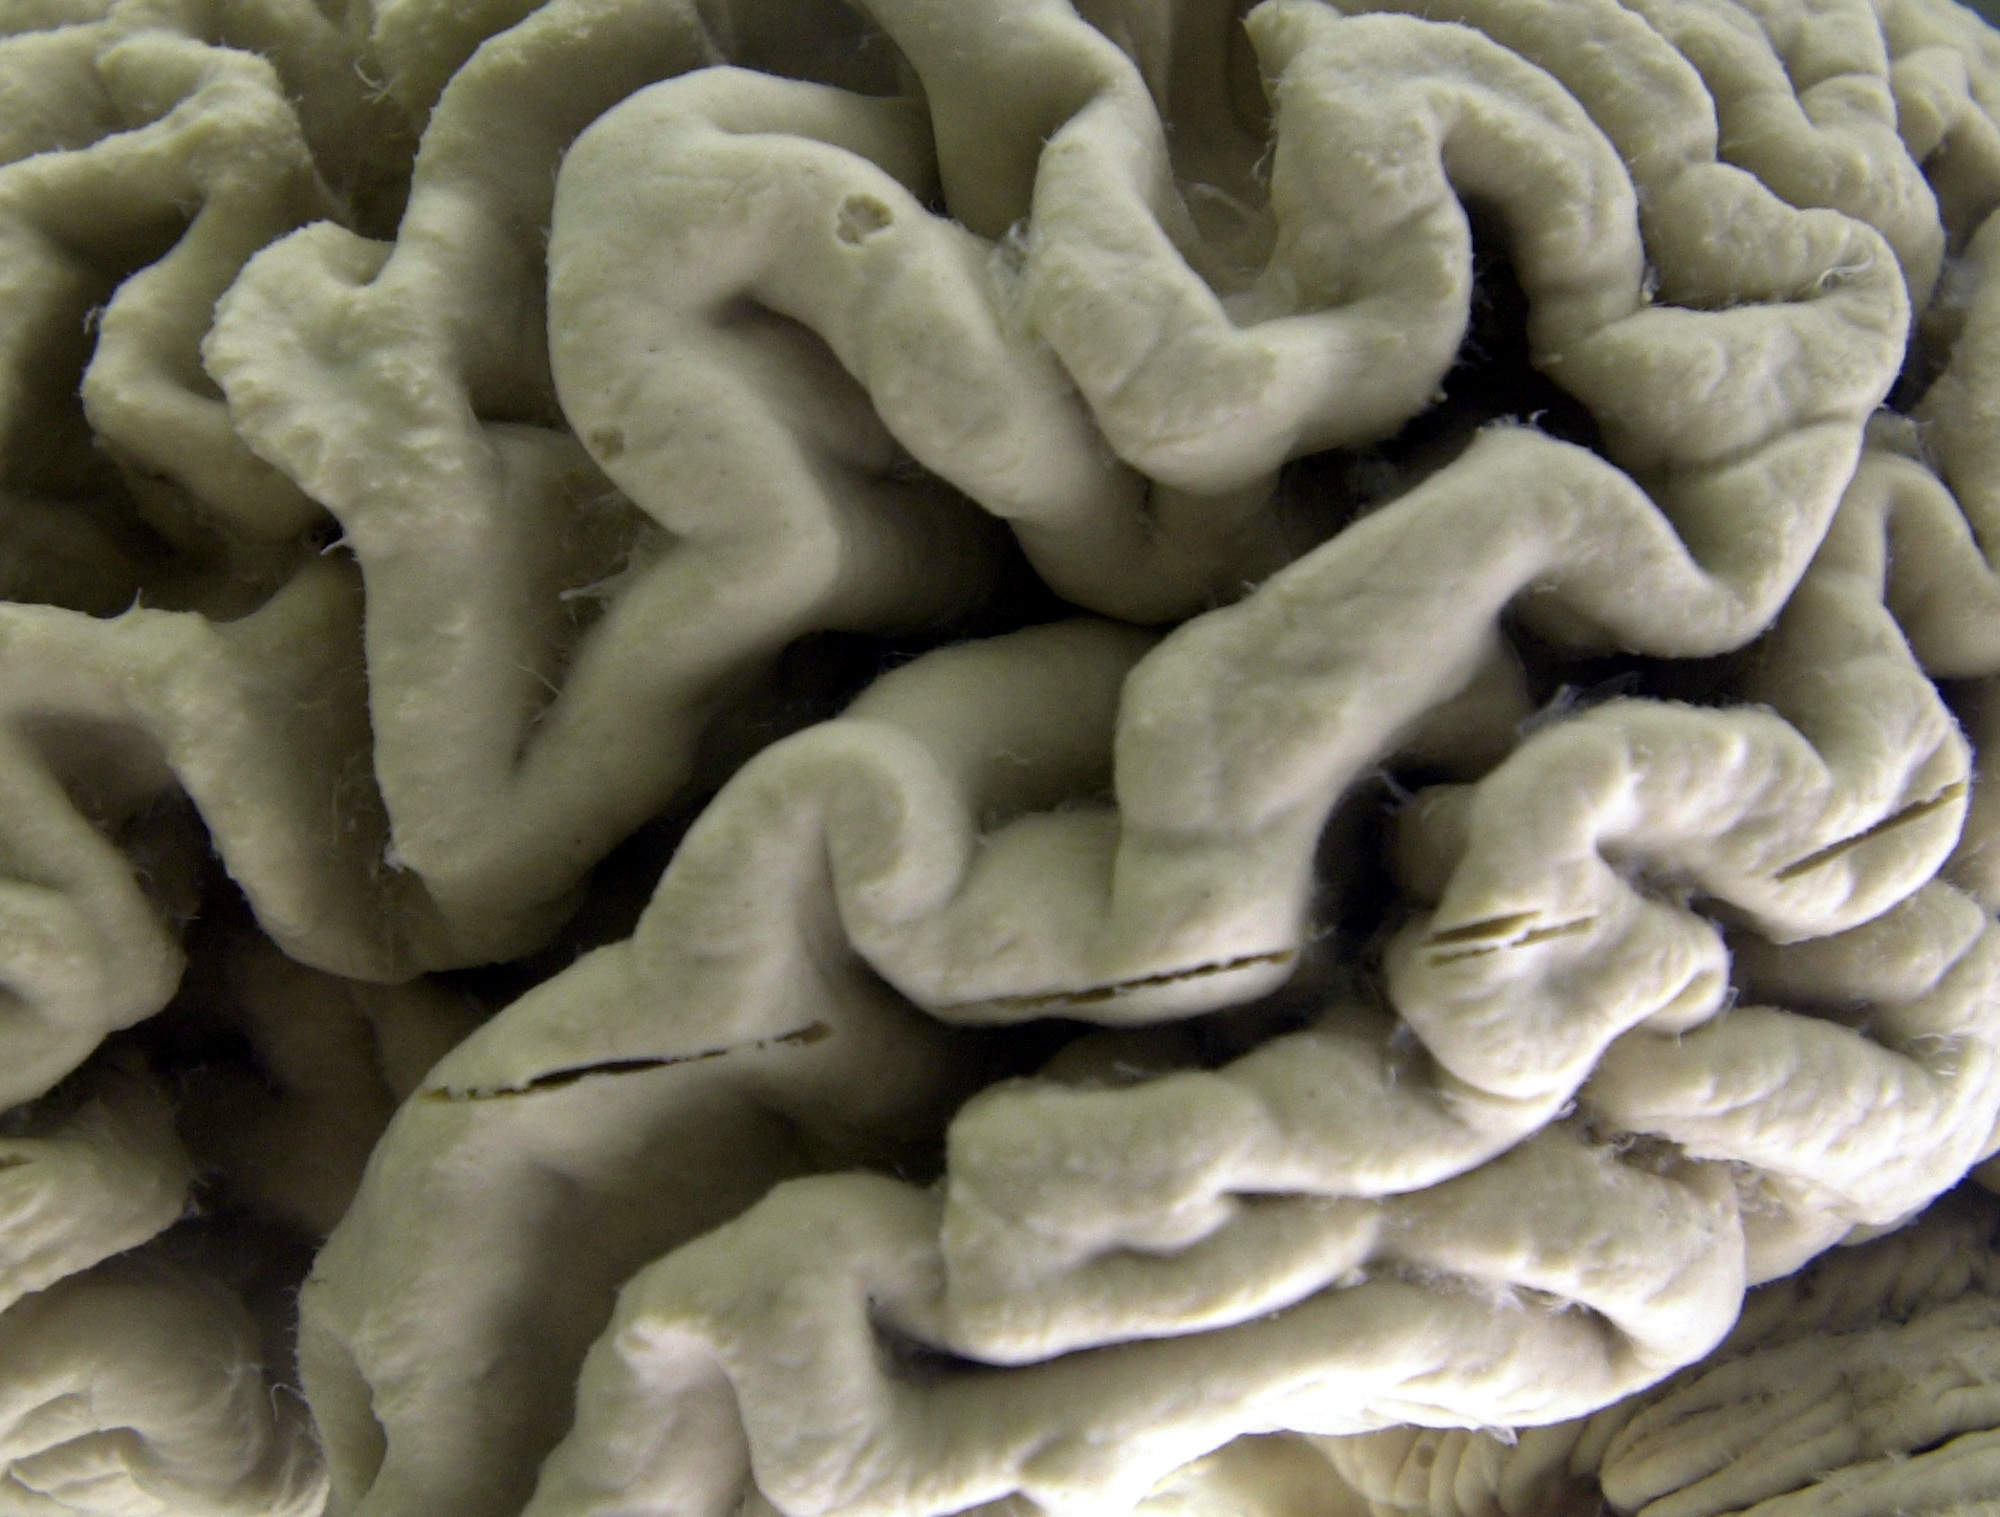 This 2003 file photo shows a closeup of a human brain affected by Alzheimer's disease. The photo is on display at the Museum of Neuroanatomy at the University at Buffalo.